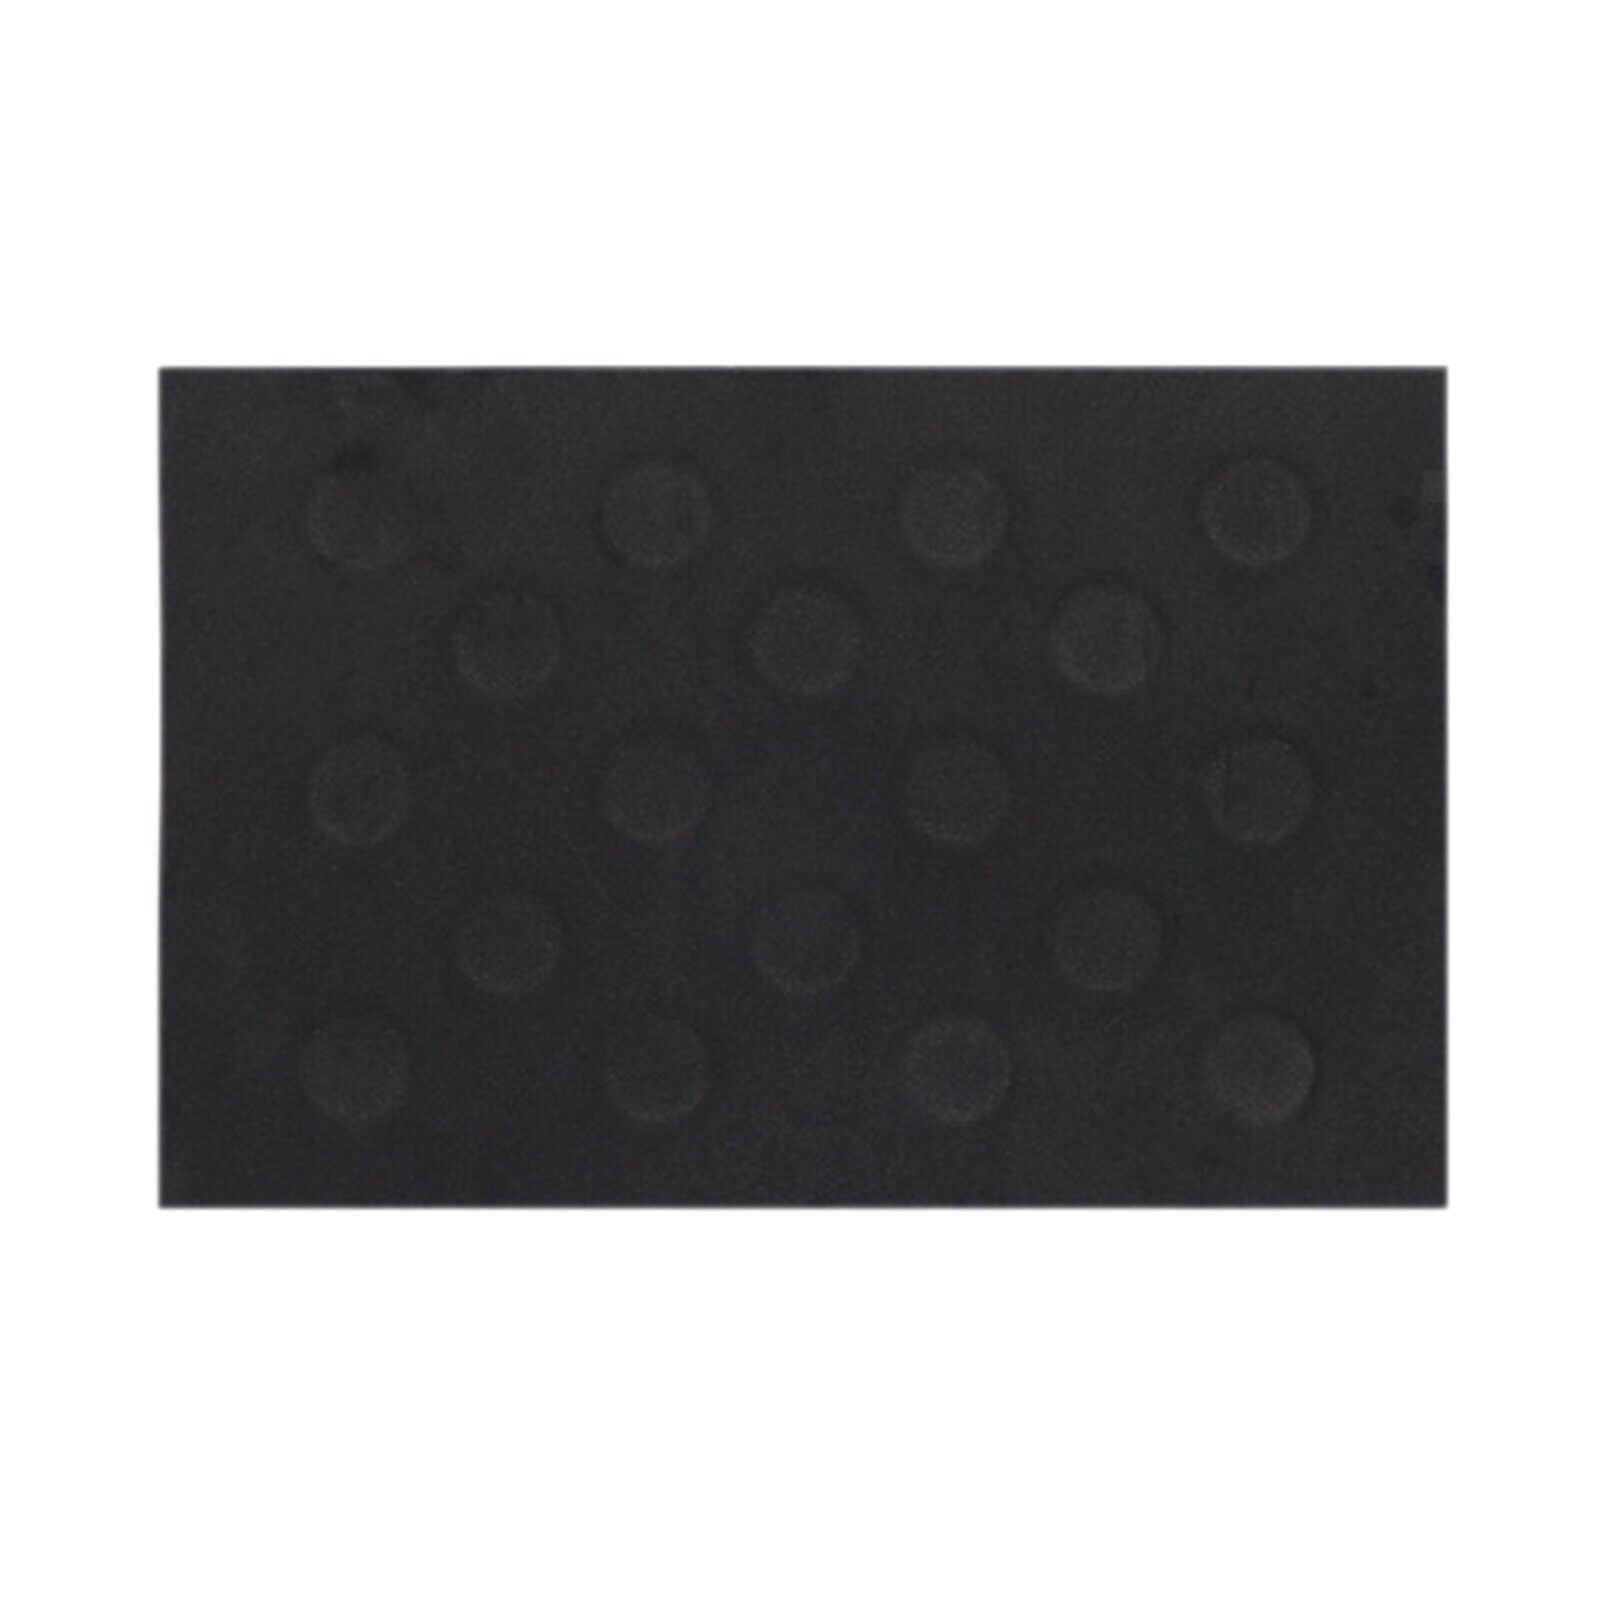 Magnetic Pad Storage Mat Holds Repair Tool While Working 300x200x3mm Black